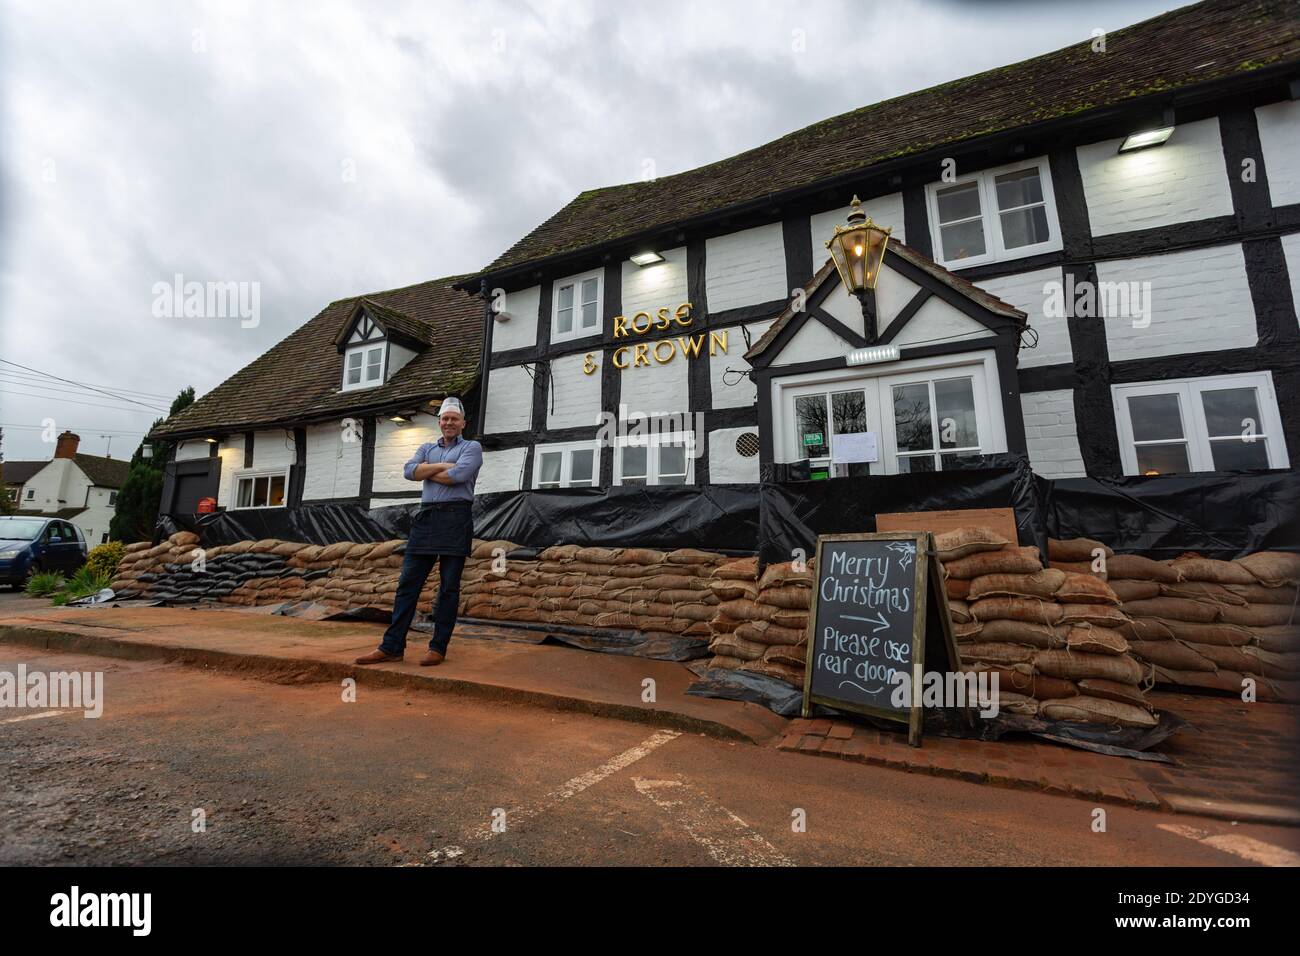 Severn Stoke, Worcestershire, UK. 26th Dec, 2020. The Rose and Crown pub at Severn Stoke in Worcestershire has sandbags as flood defences. The pub floods most years when the nearby rivers Severn and Teme burst their banks. Proprieter Andrew Goodall has recently taken over the pub and has spent thousands on flood protection. Credit: Peter Lopeman/Alamy Live News Stock Photo